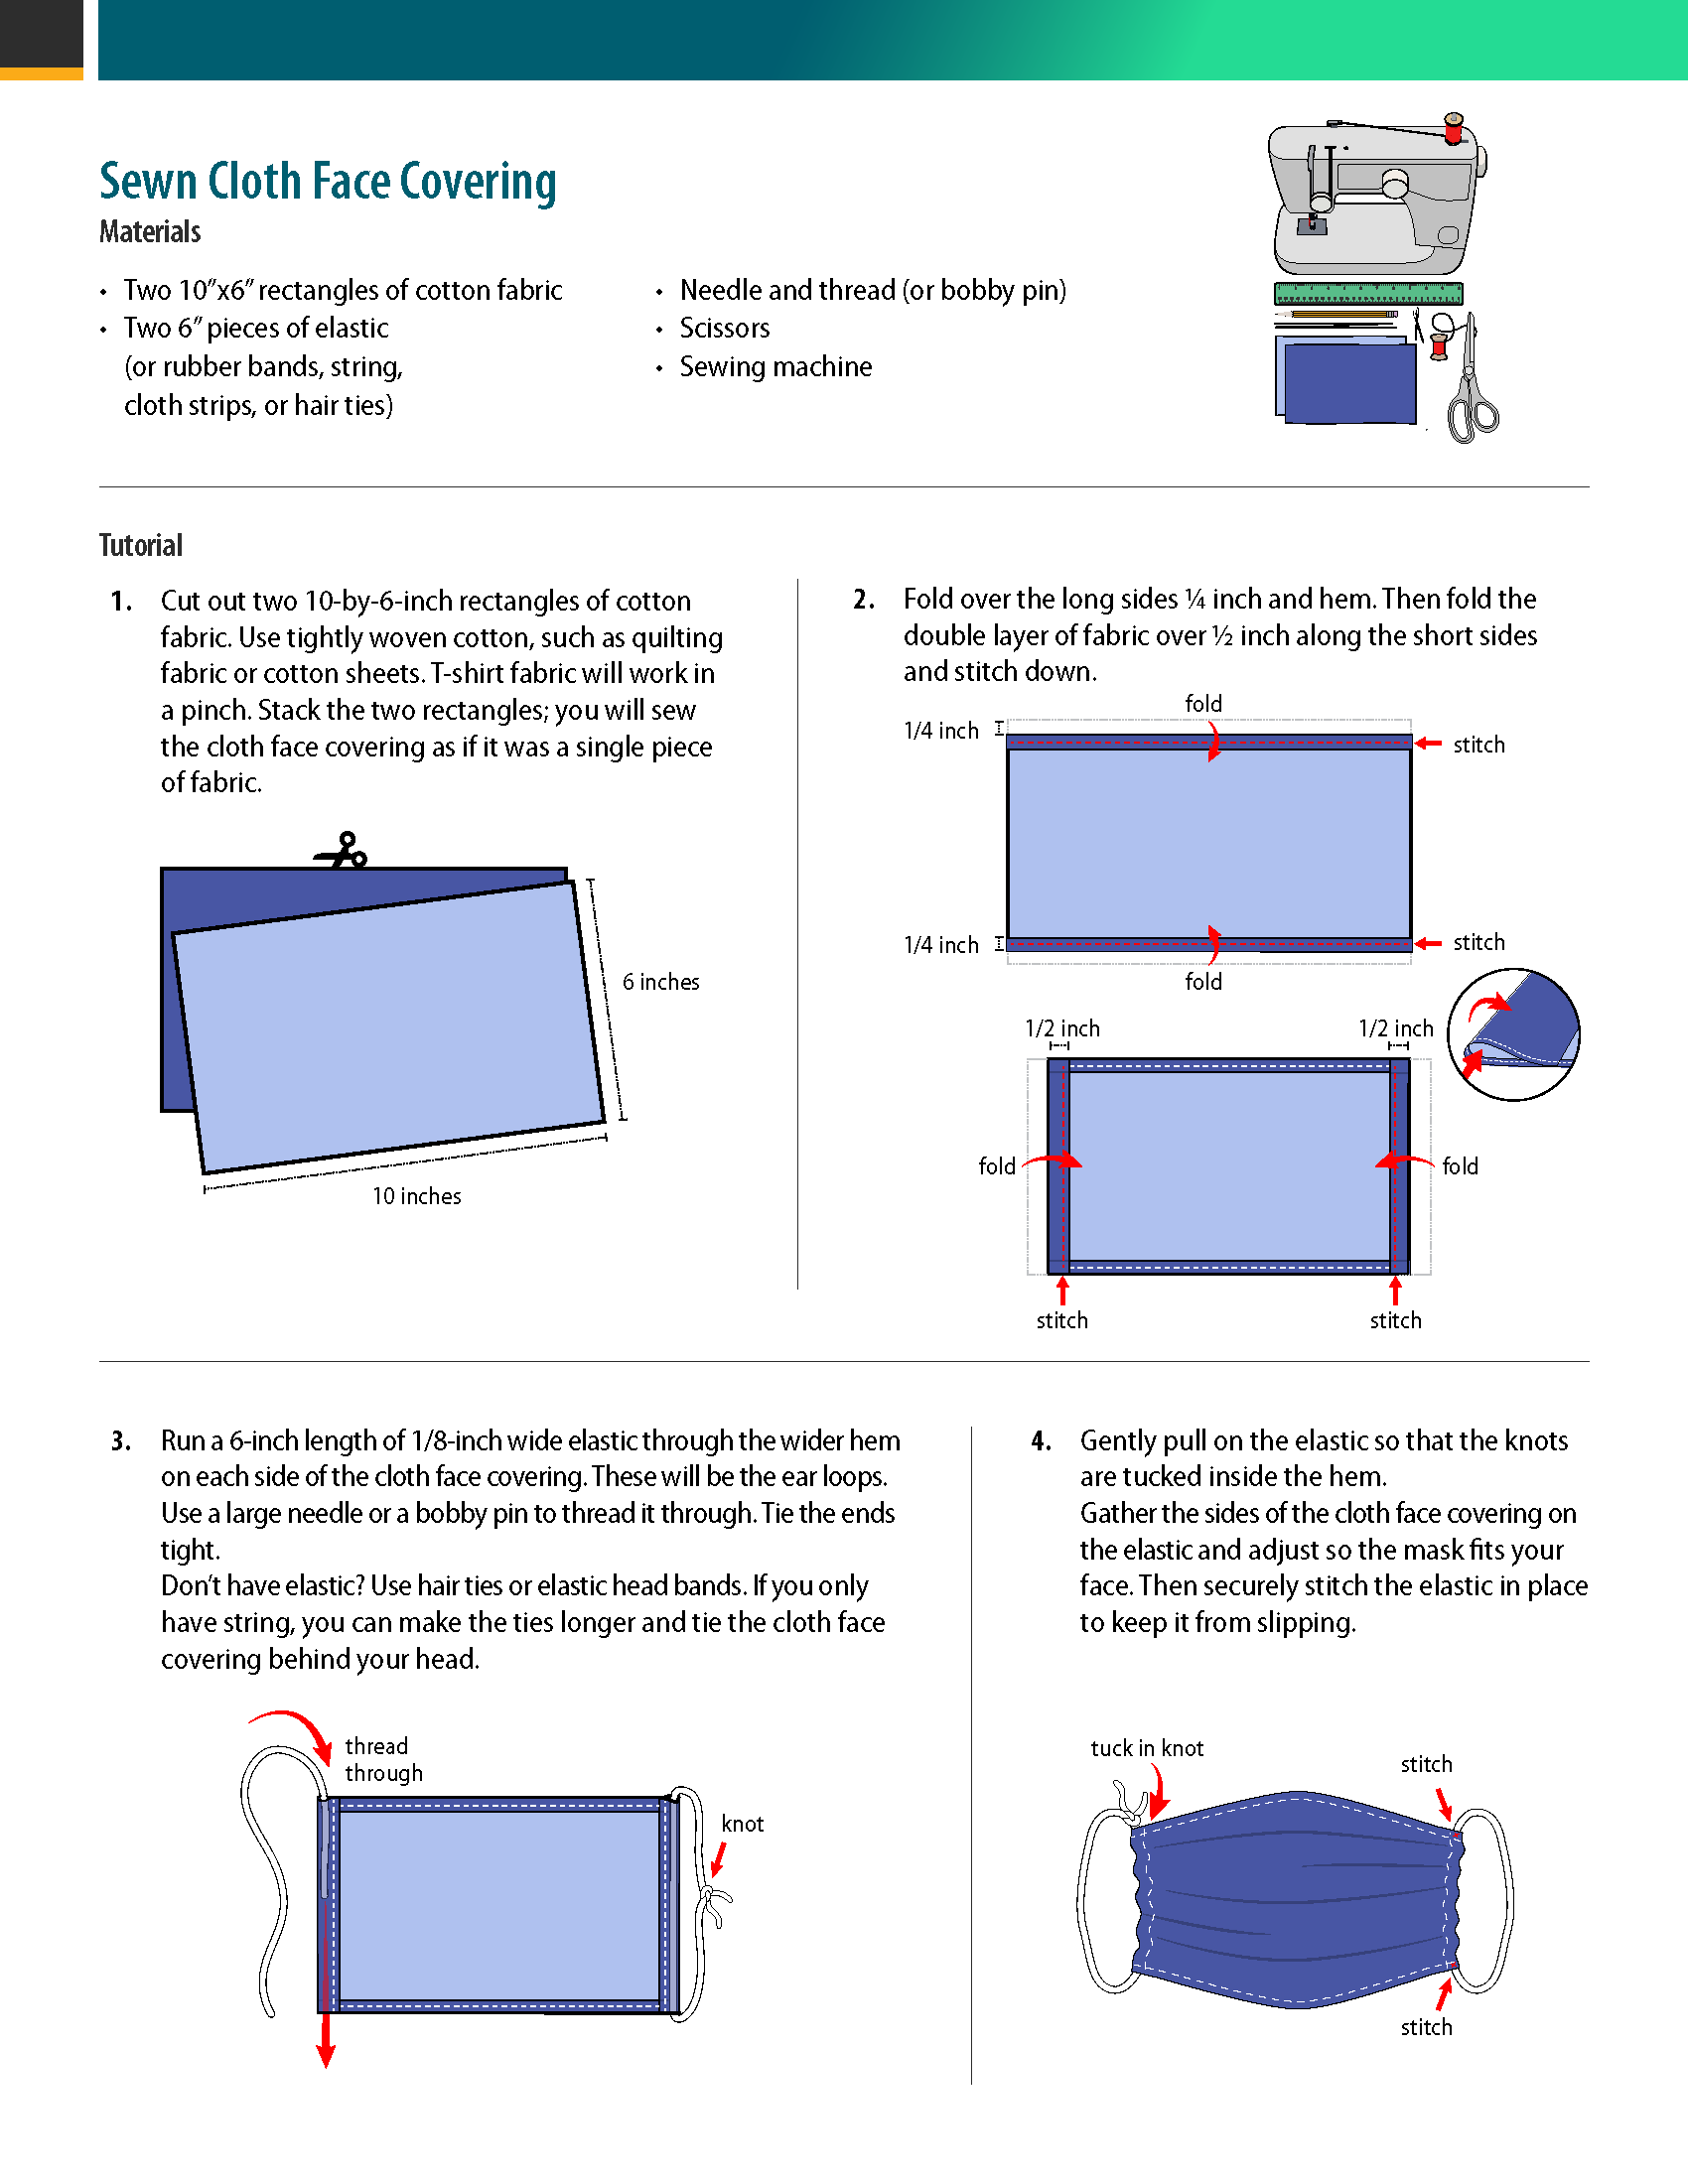 page 2 of diy guide